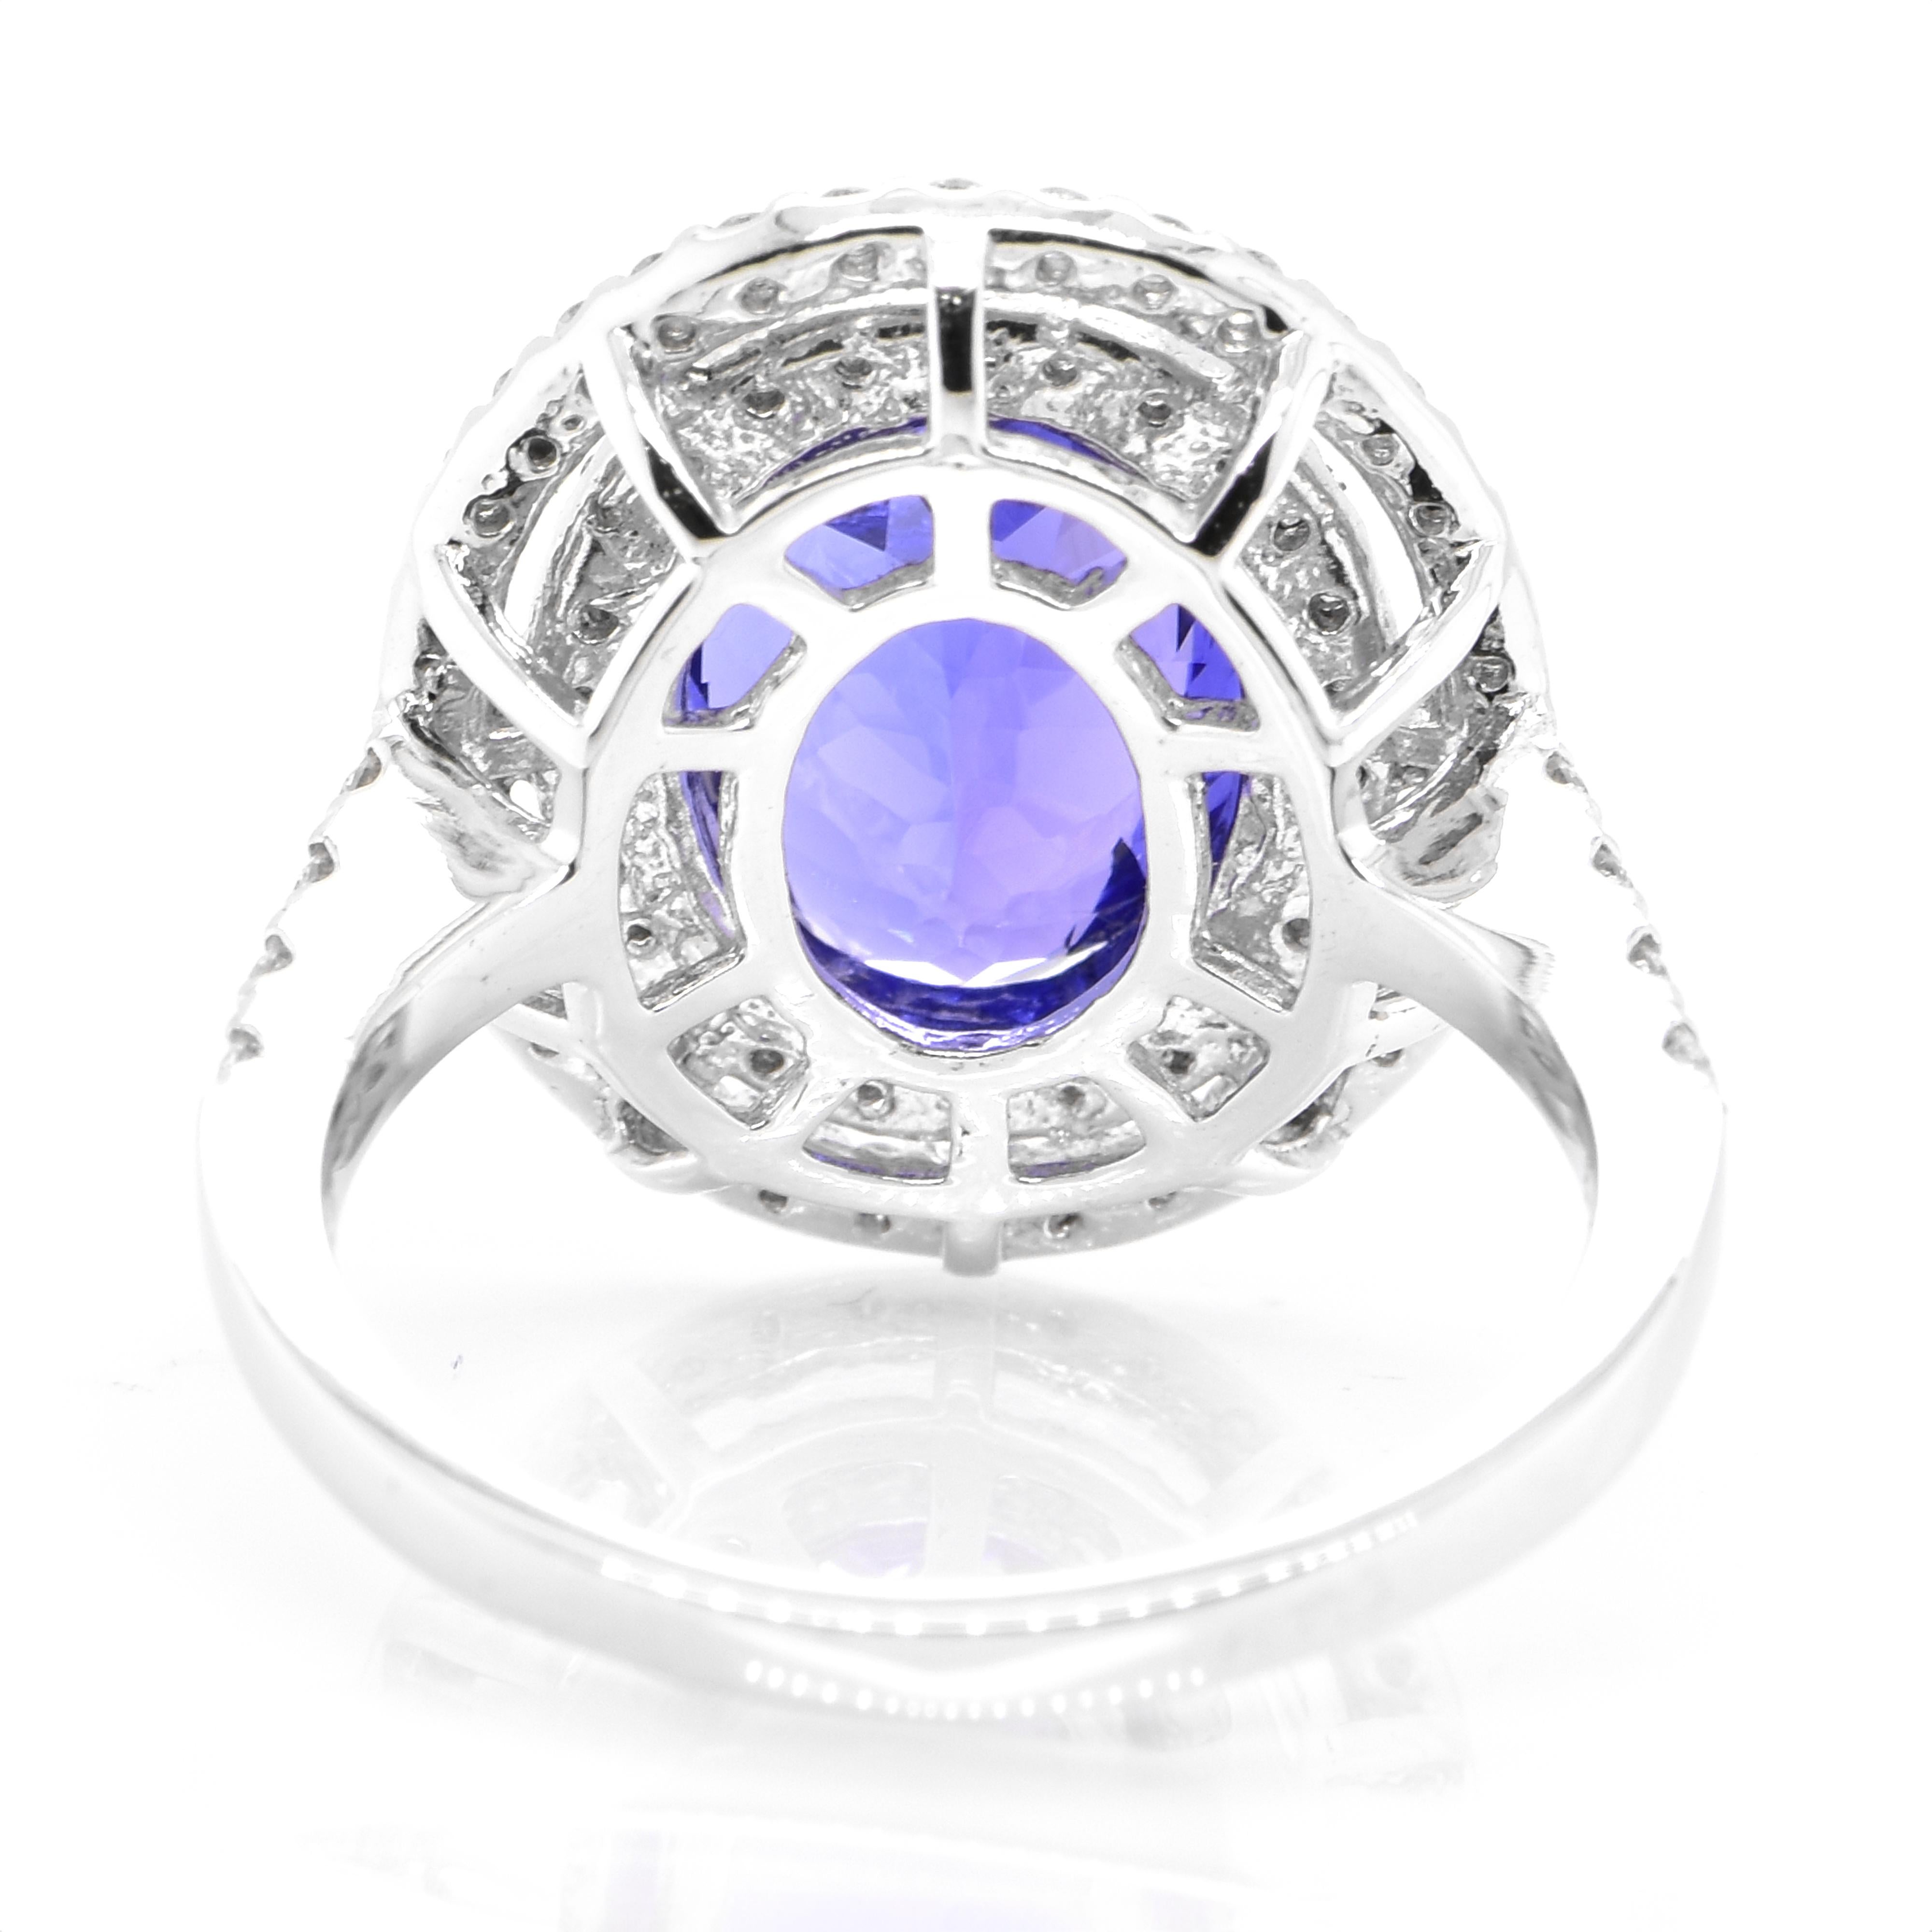 Women's 4.45 Carat Natural Tanzanite and Diamond Cocktail Ring Set in Platinum For Sale